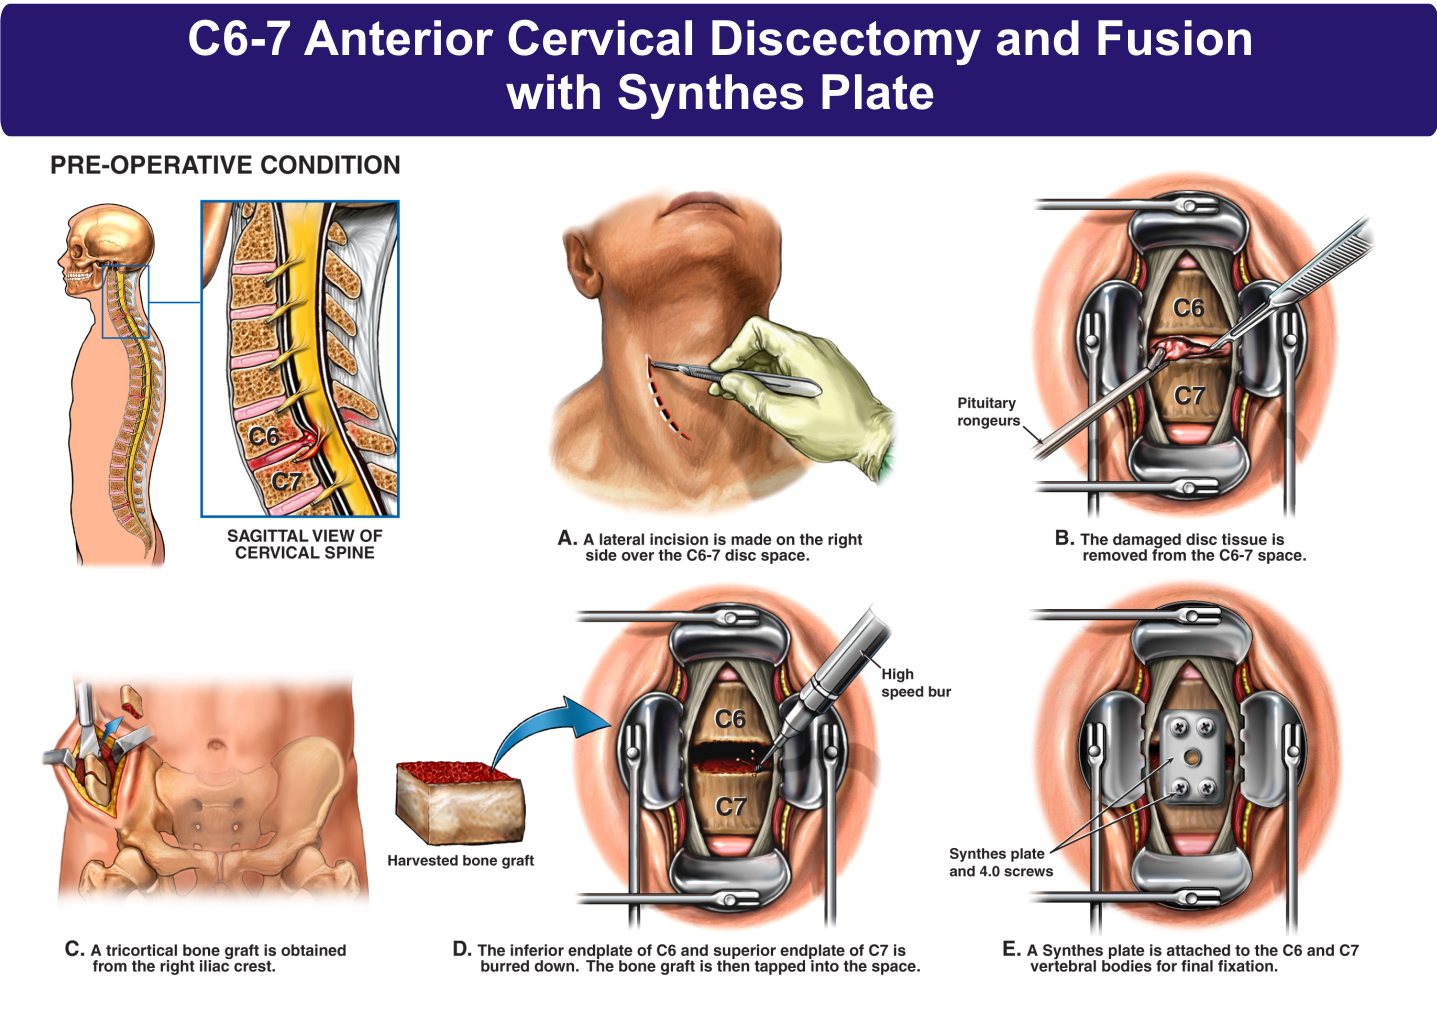 C67 Anterior Cervical Discectomy and Fusion with Synthes